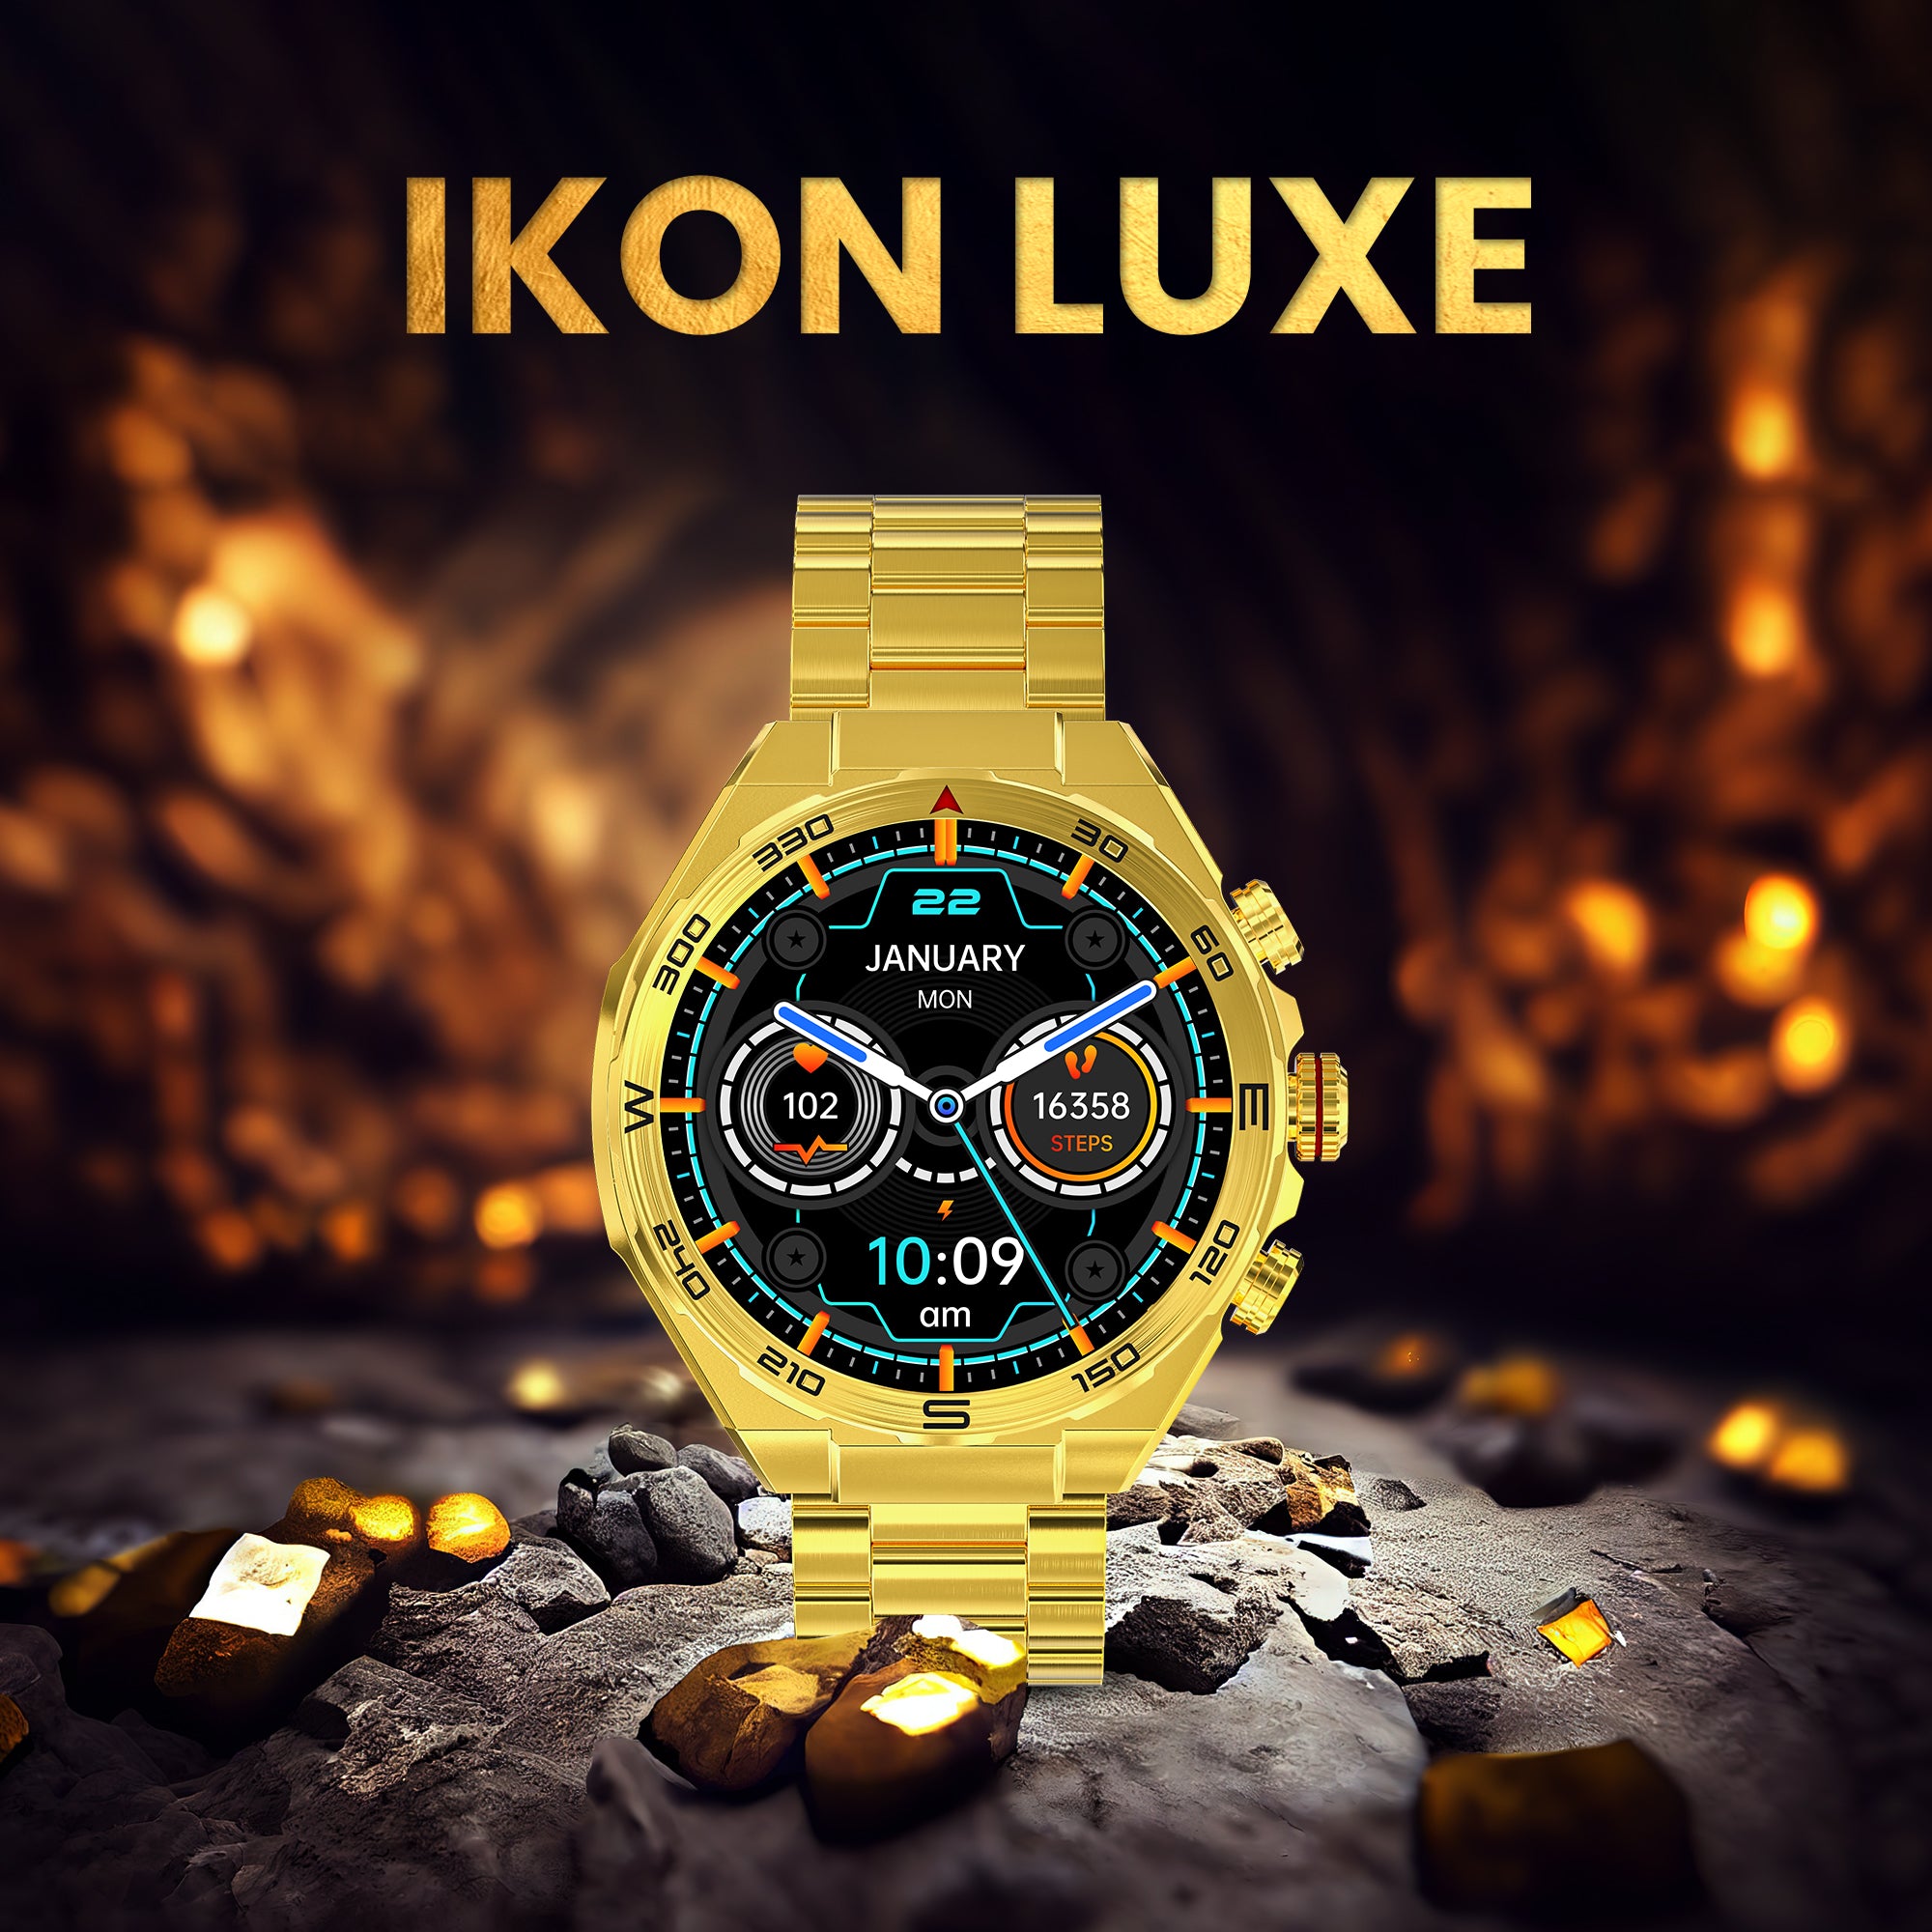 GIZMORE IKON Luxe 3.93cm (1.55) FHD Display | AOD with 600 NITS I Active Crown & 3 Buttons Control | IP68 | Zinc Alloy Metal Body | 15 Days Battery & 120 Sport Modes I BT Calling Smartwatch